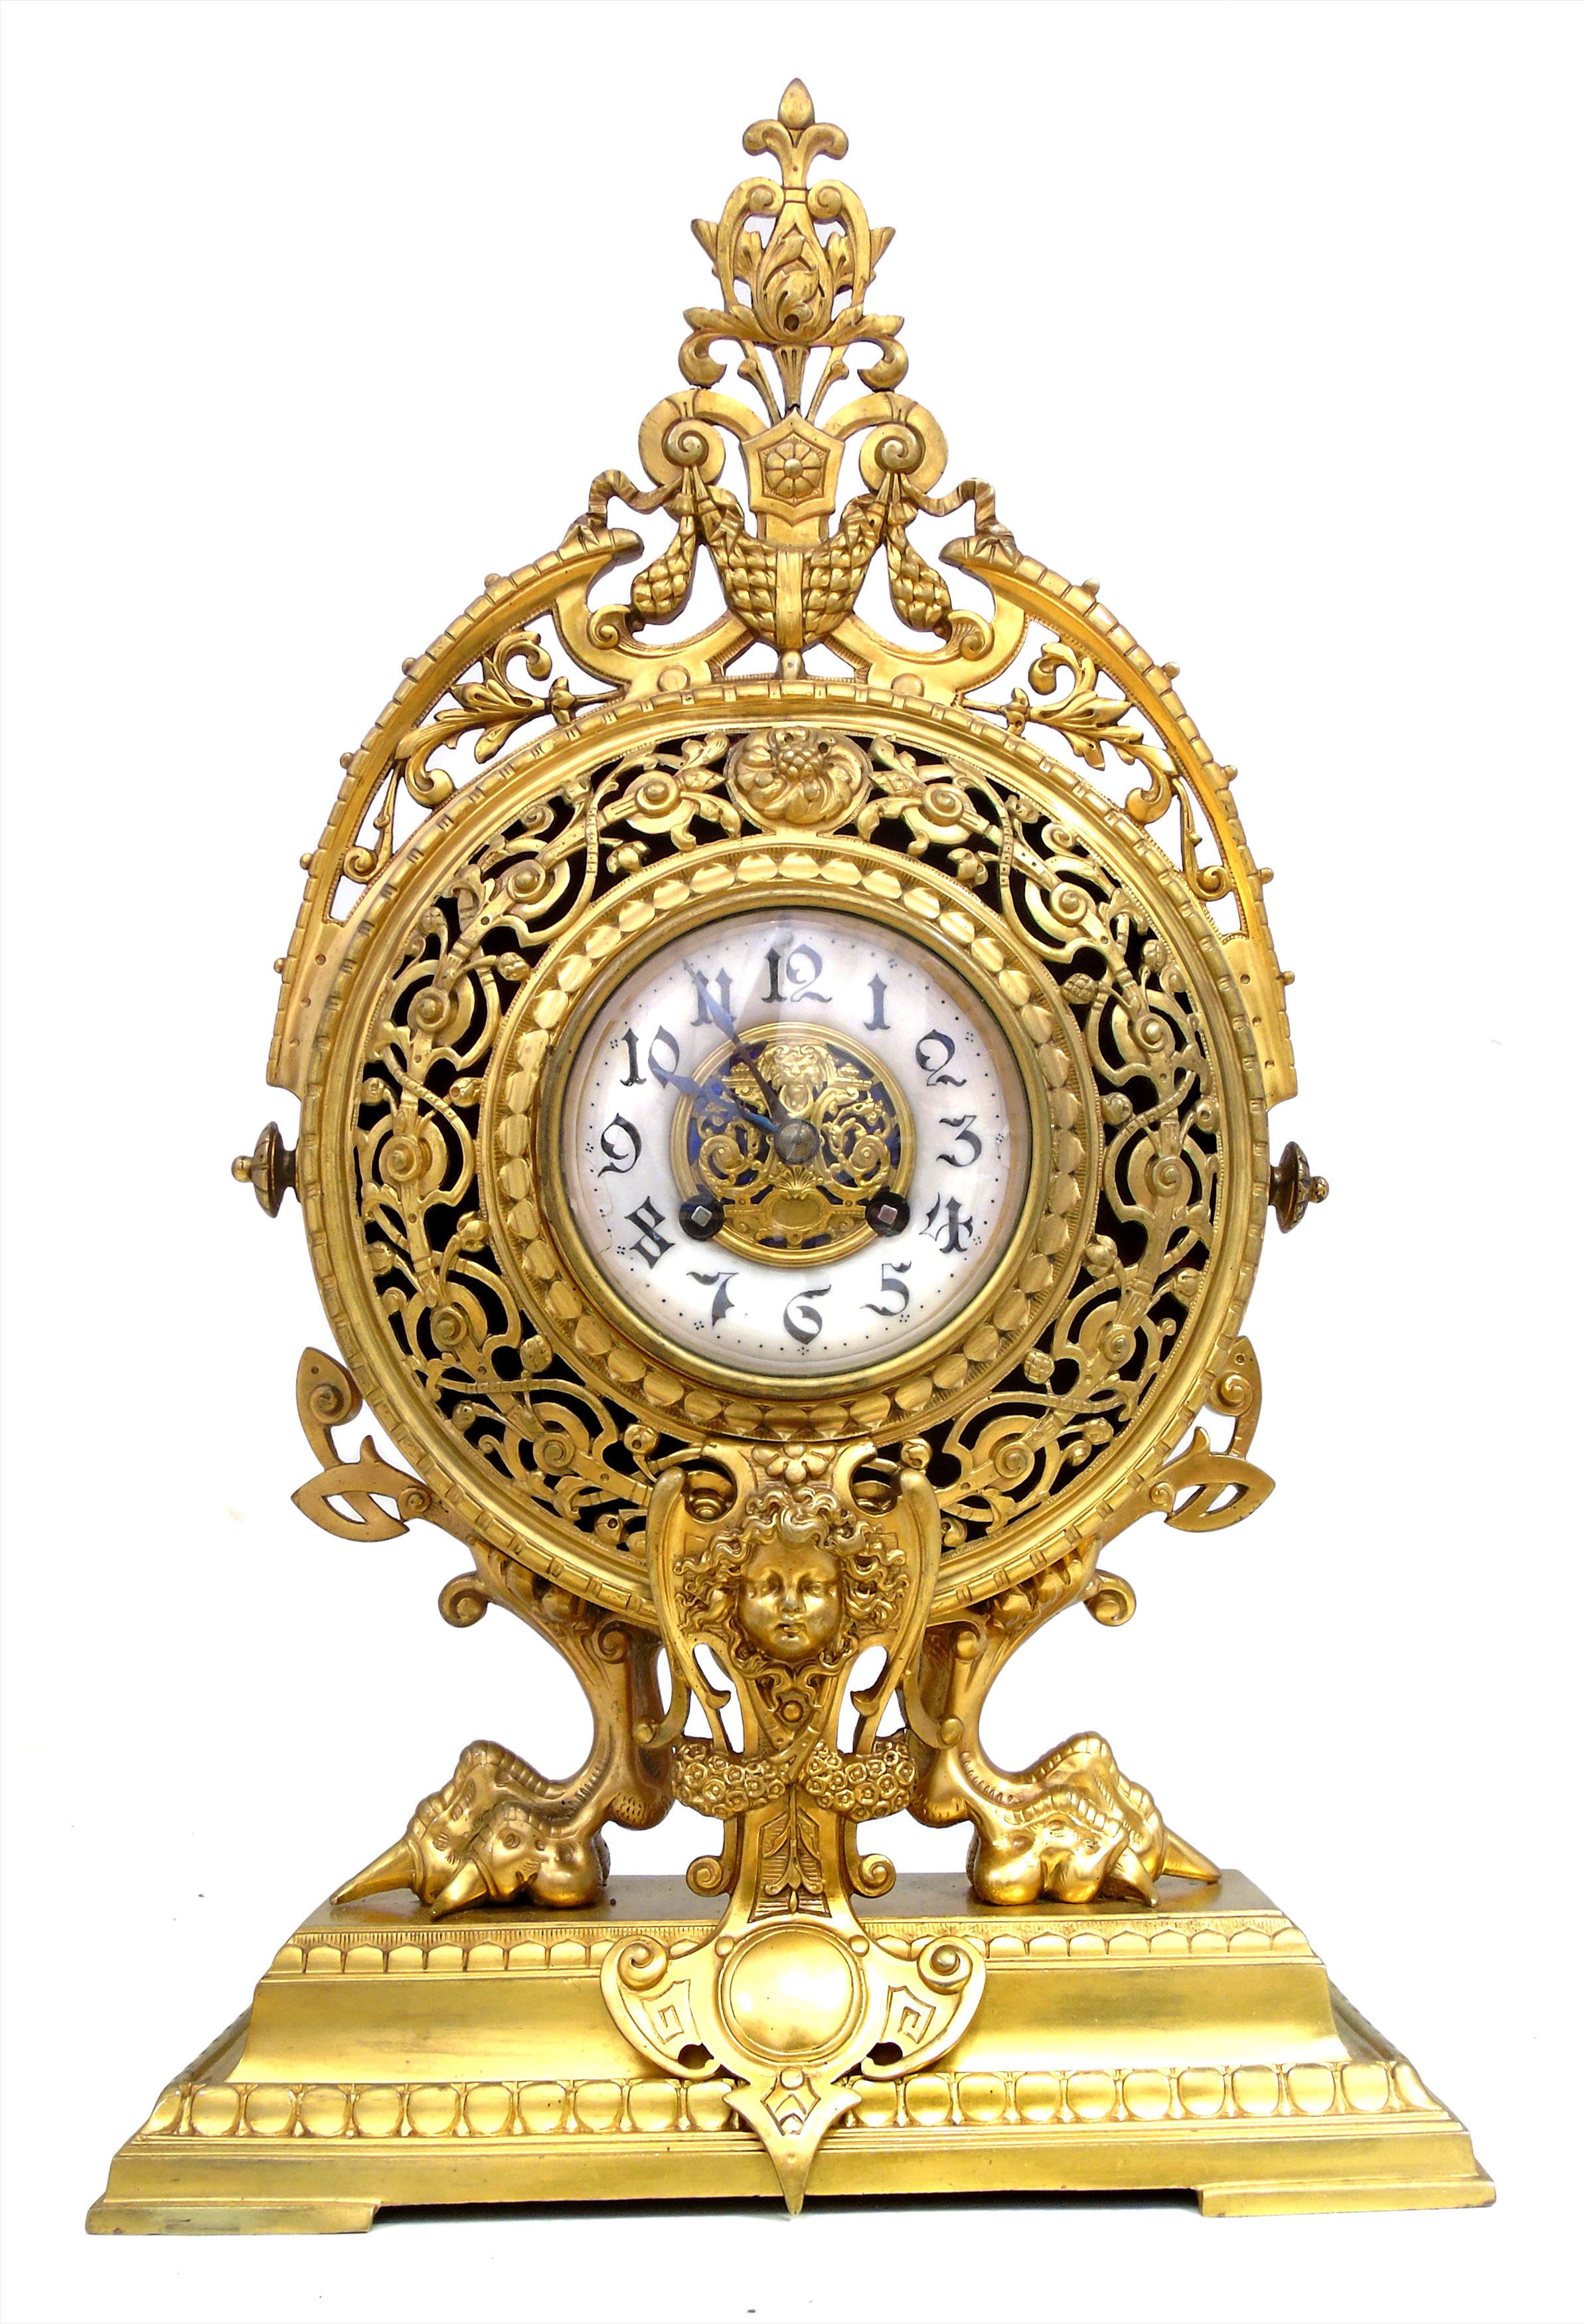 Late 19th century French mantel clock